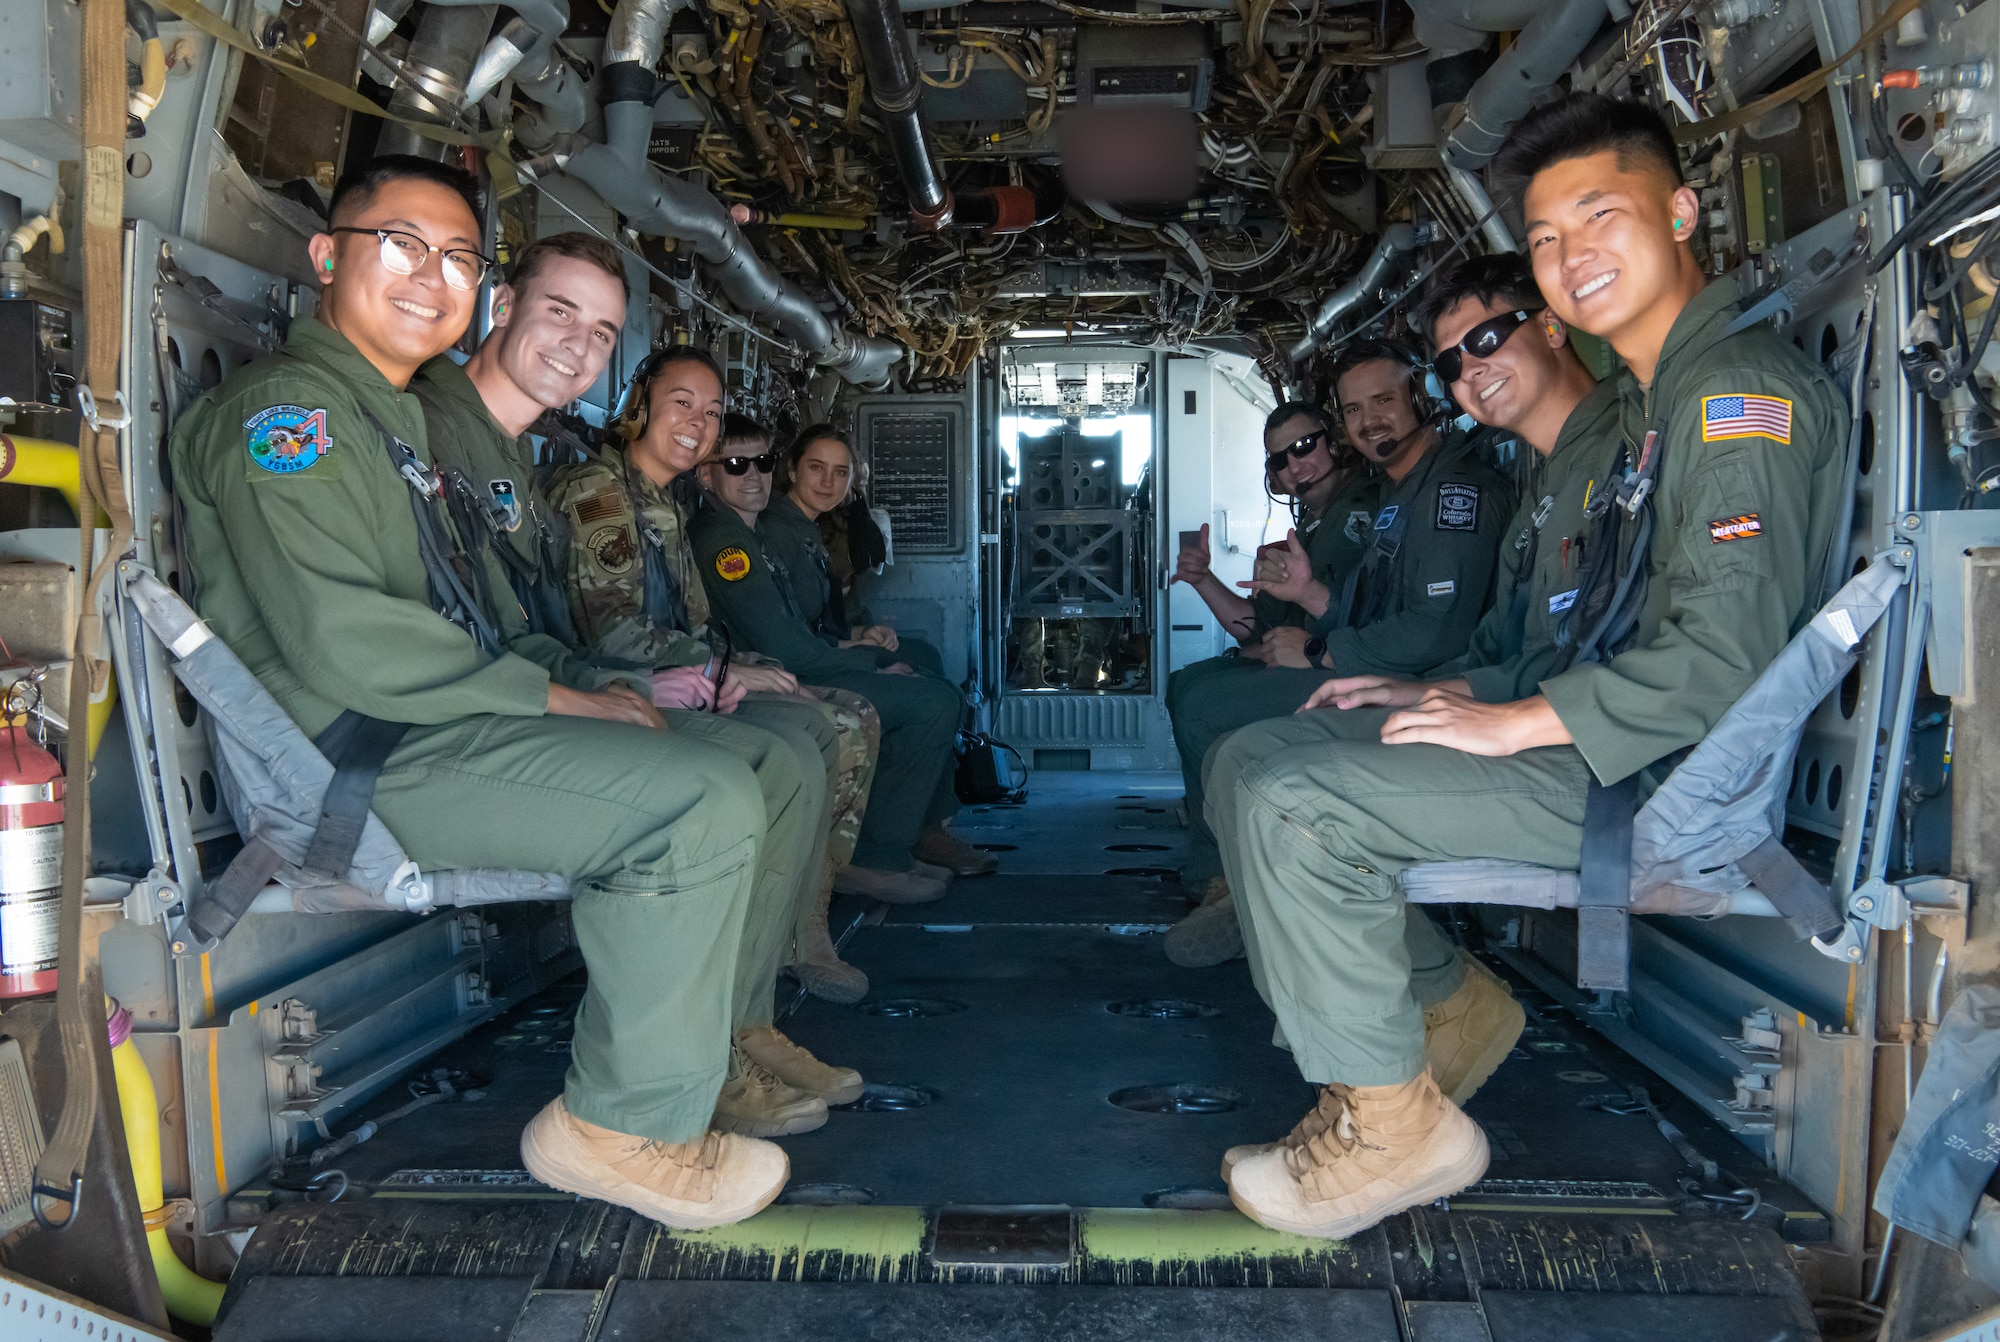 Airmen sitting in a military aircraft look towards out of the aircraft for a group photo.